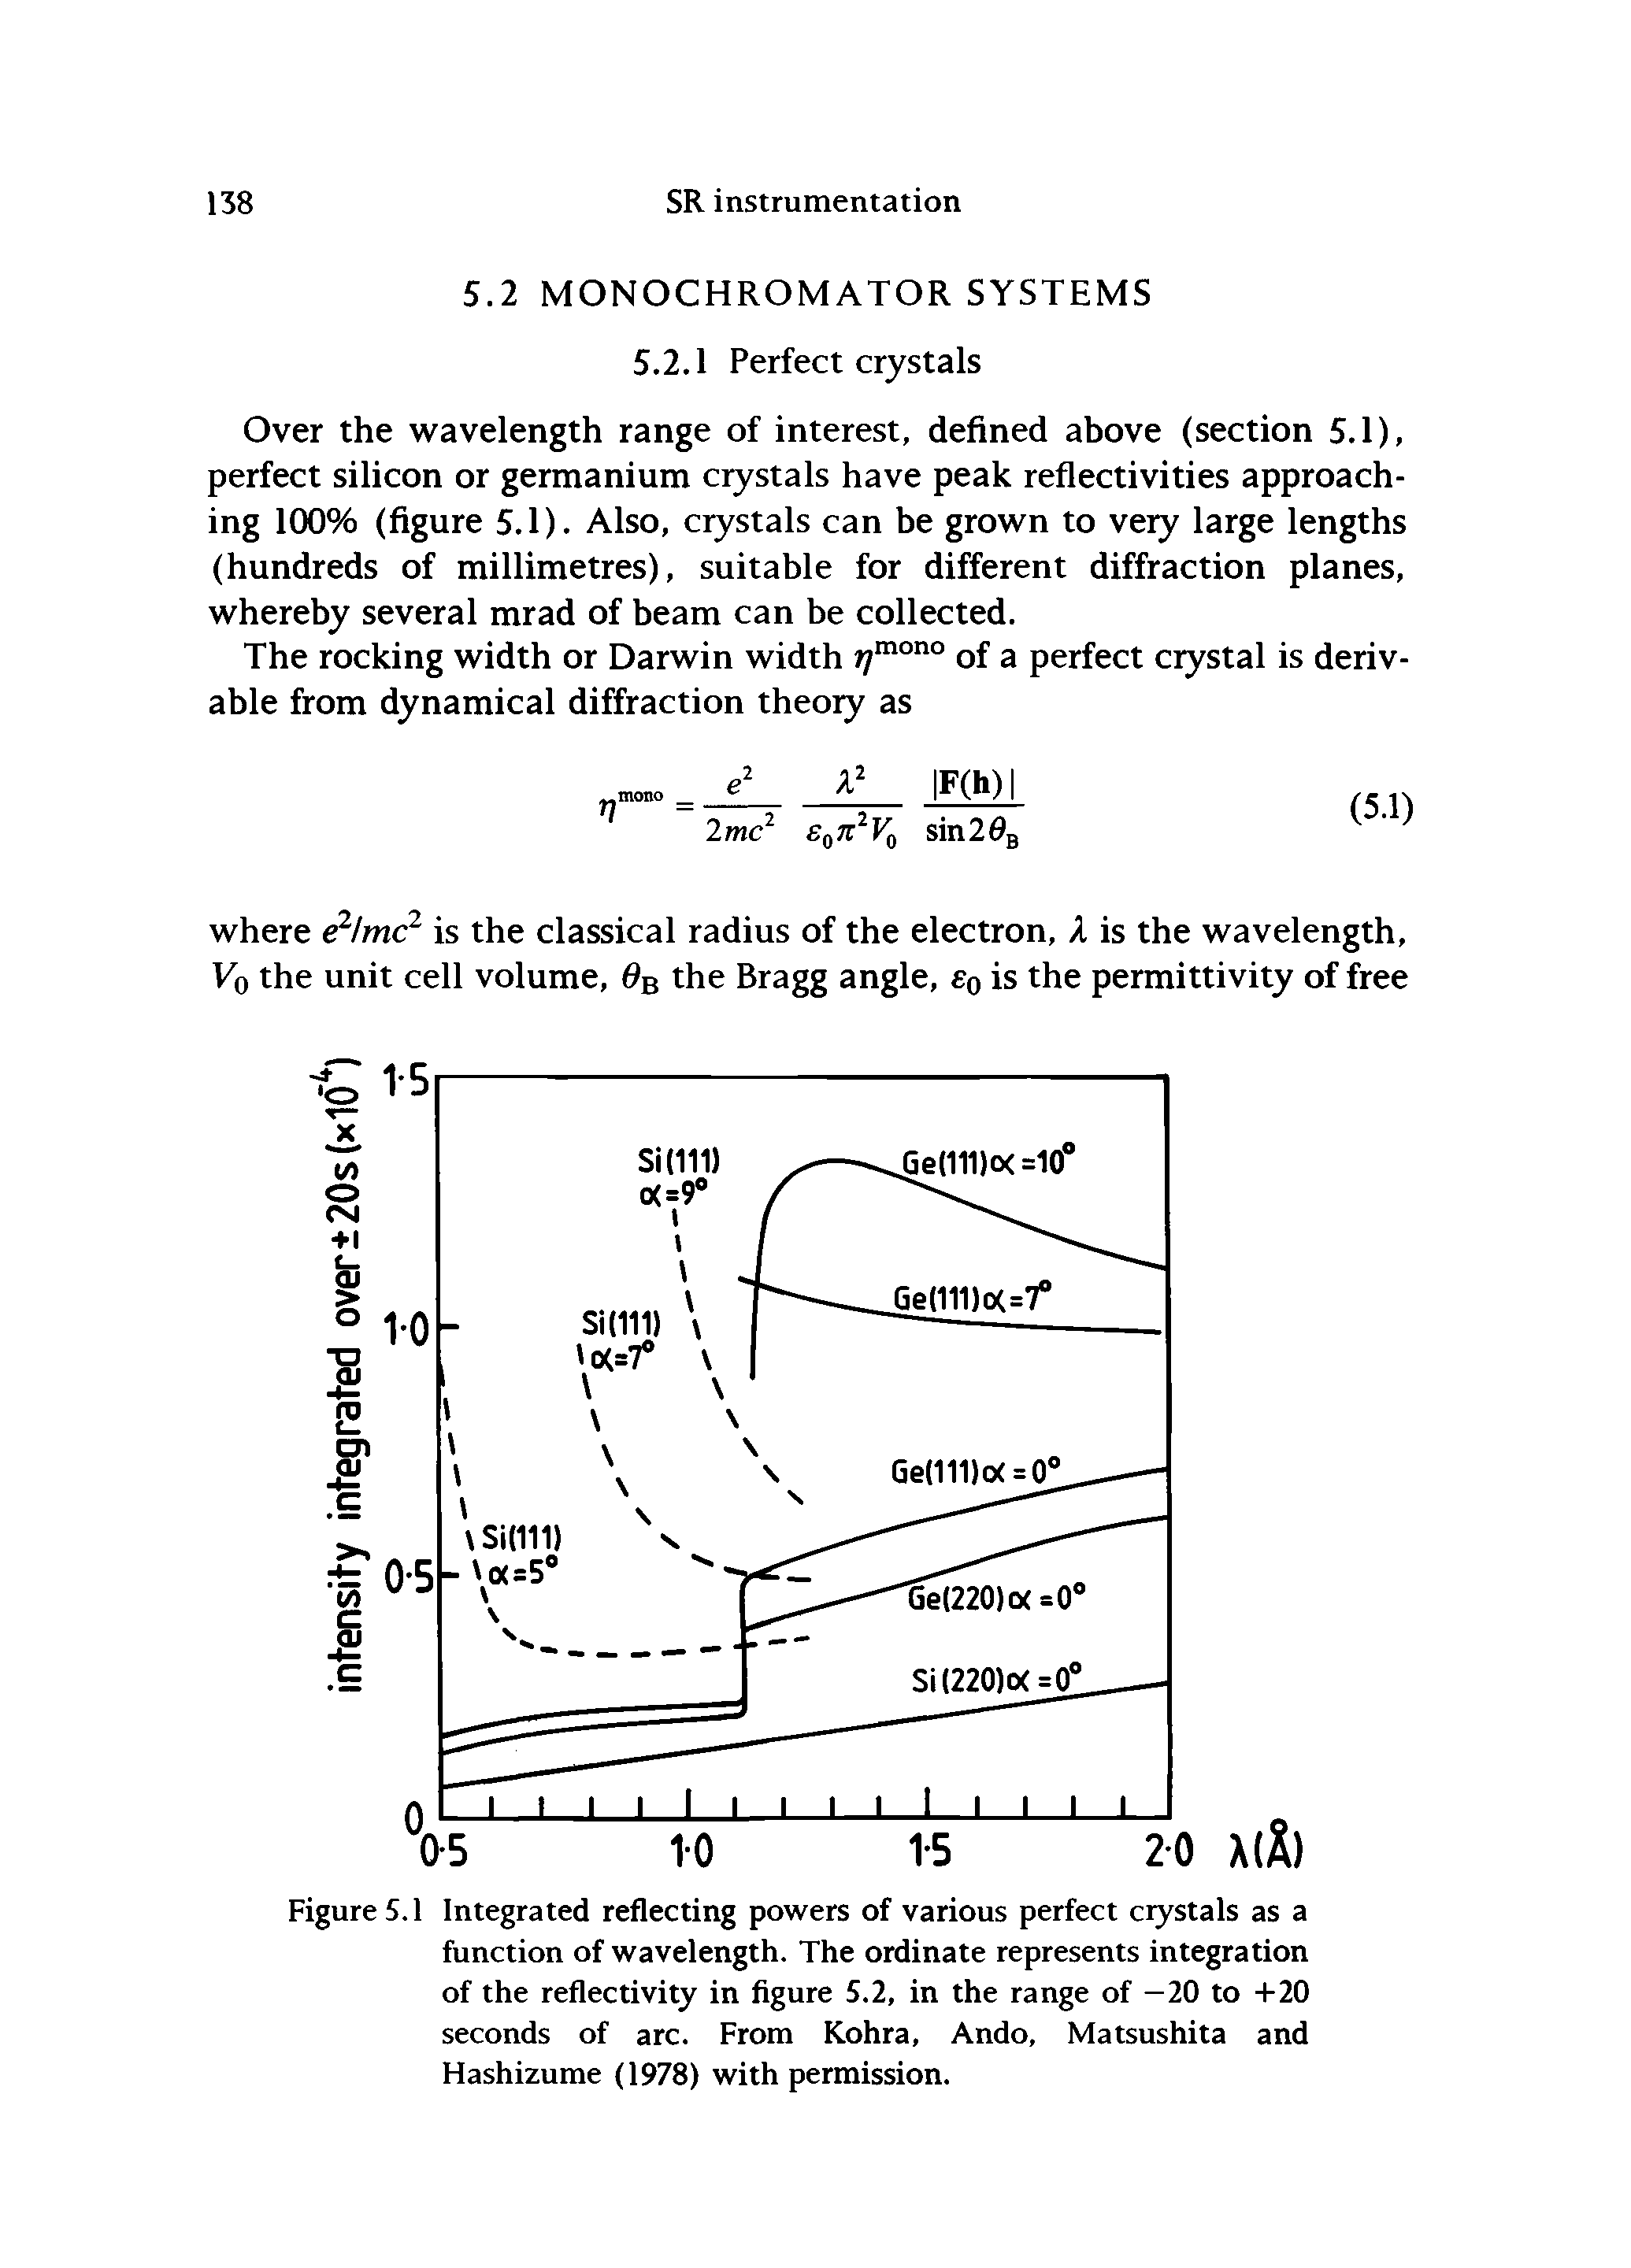 Figure 5.1 Integrated reflecting powers of various perfect crystals as a function of wavelength. The ordinate represents integration of the reflectivity in figure 5.2, in the range of —20 to +20 seconds of arc. From Kohra, Ando, Matsushita and Hashizume (1978) with permission.